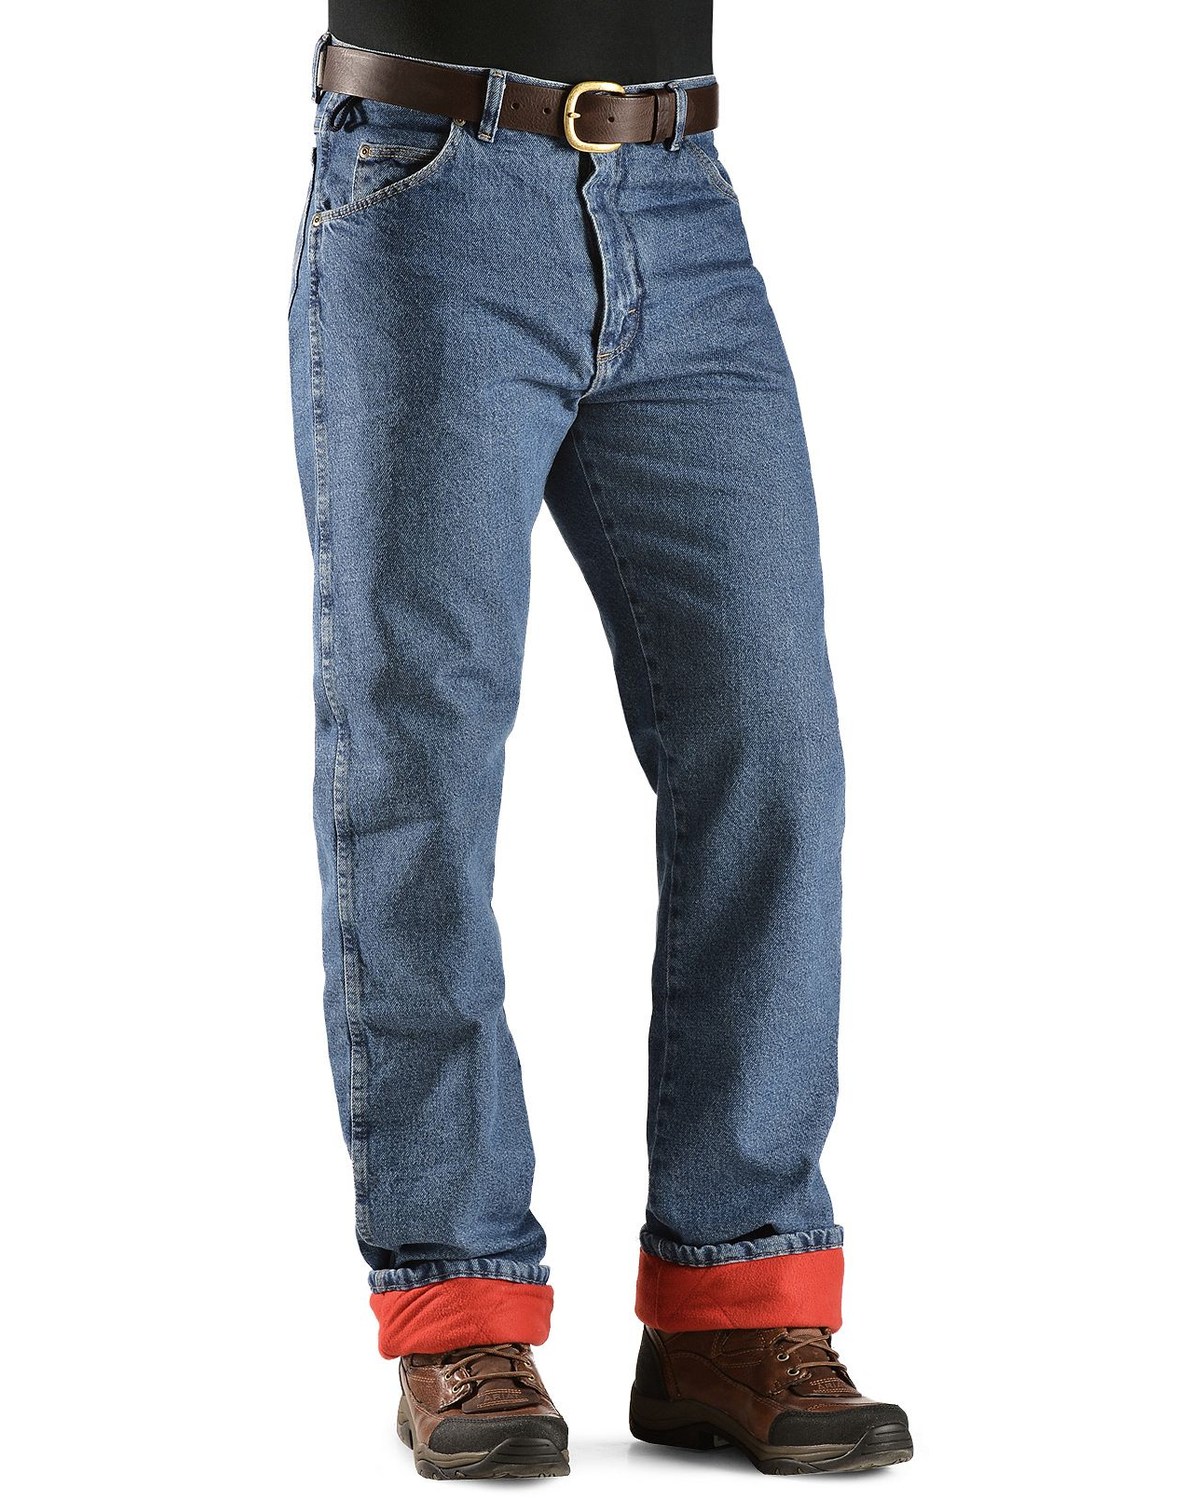 Wrangler Jeans - Rugged Wear Relaxed Fit Flannel Lined | Boot Barn